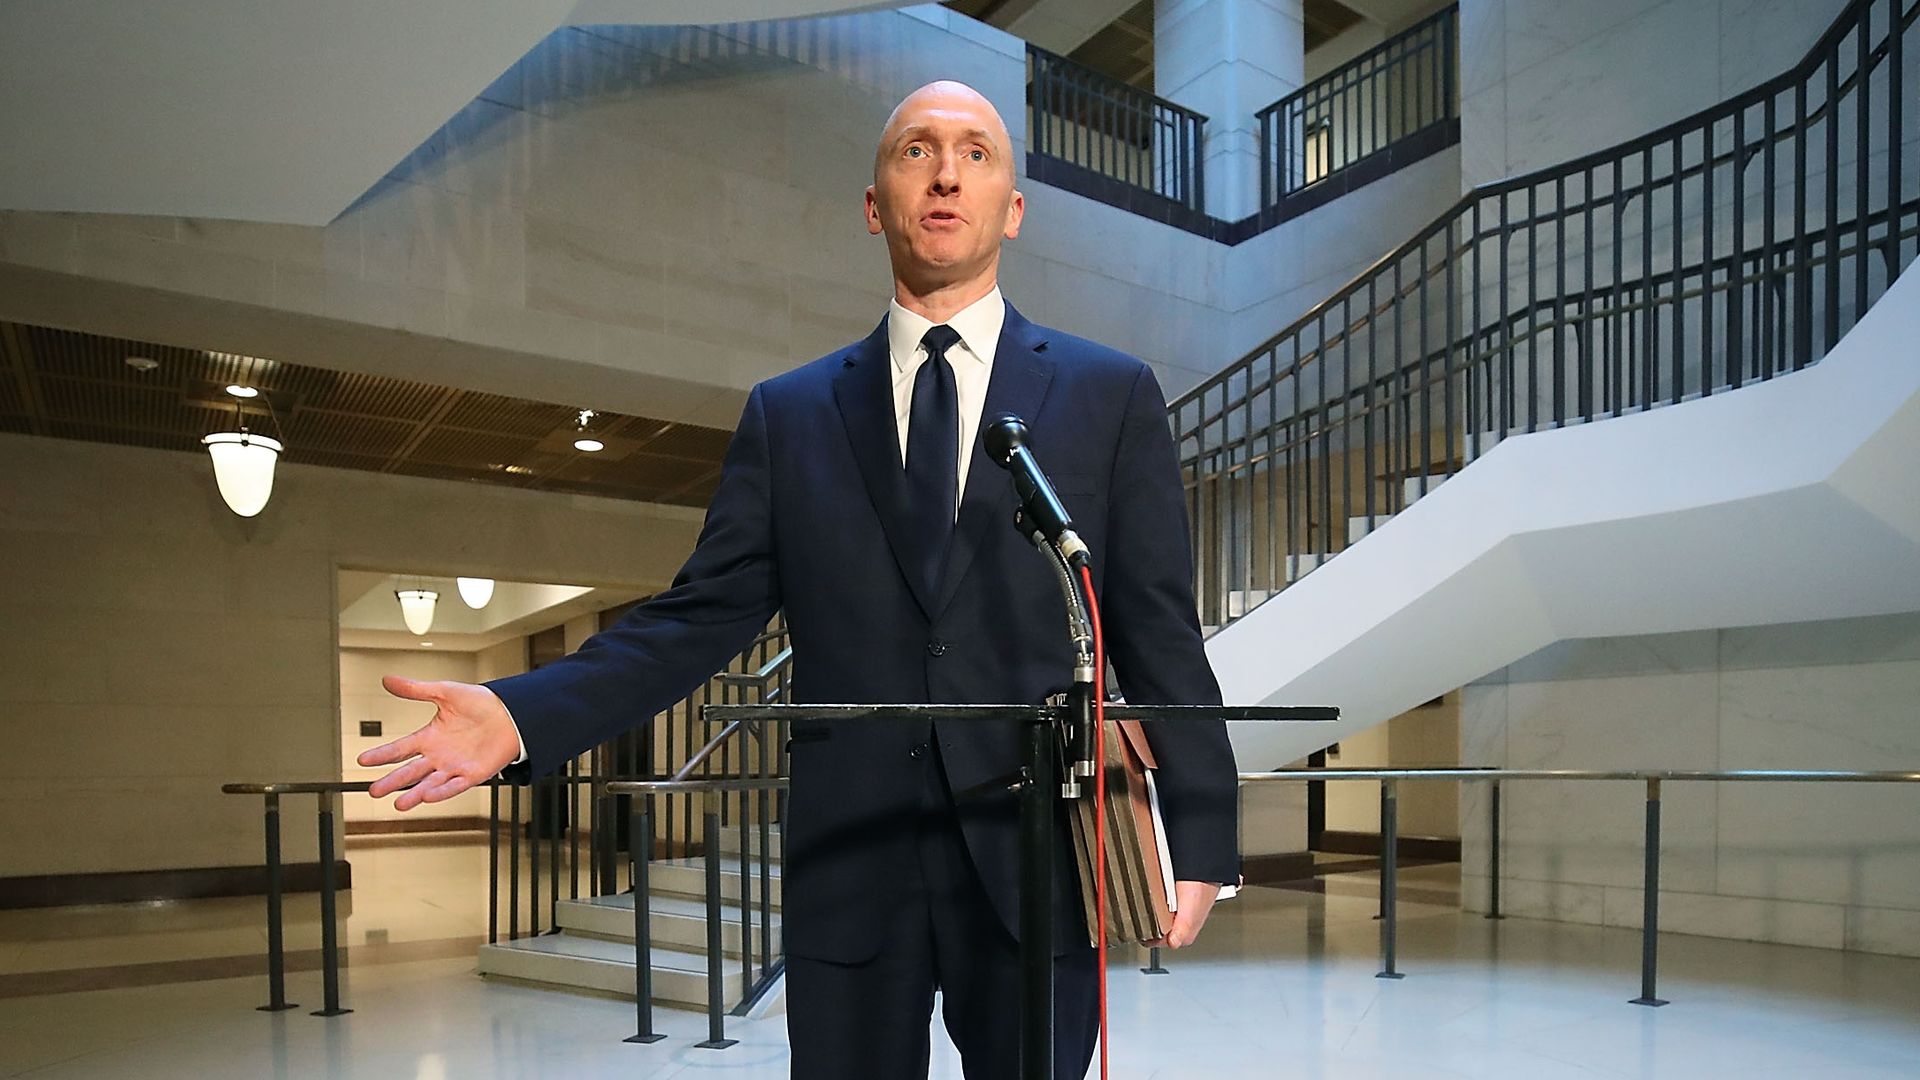 Carter Page addresses reporters